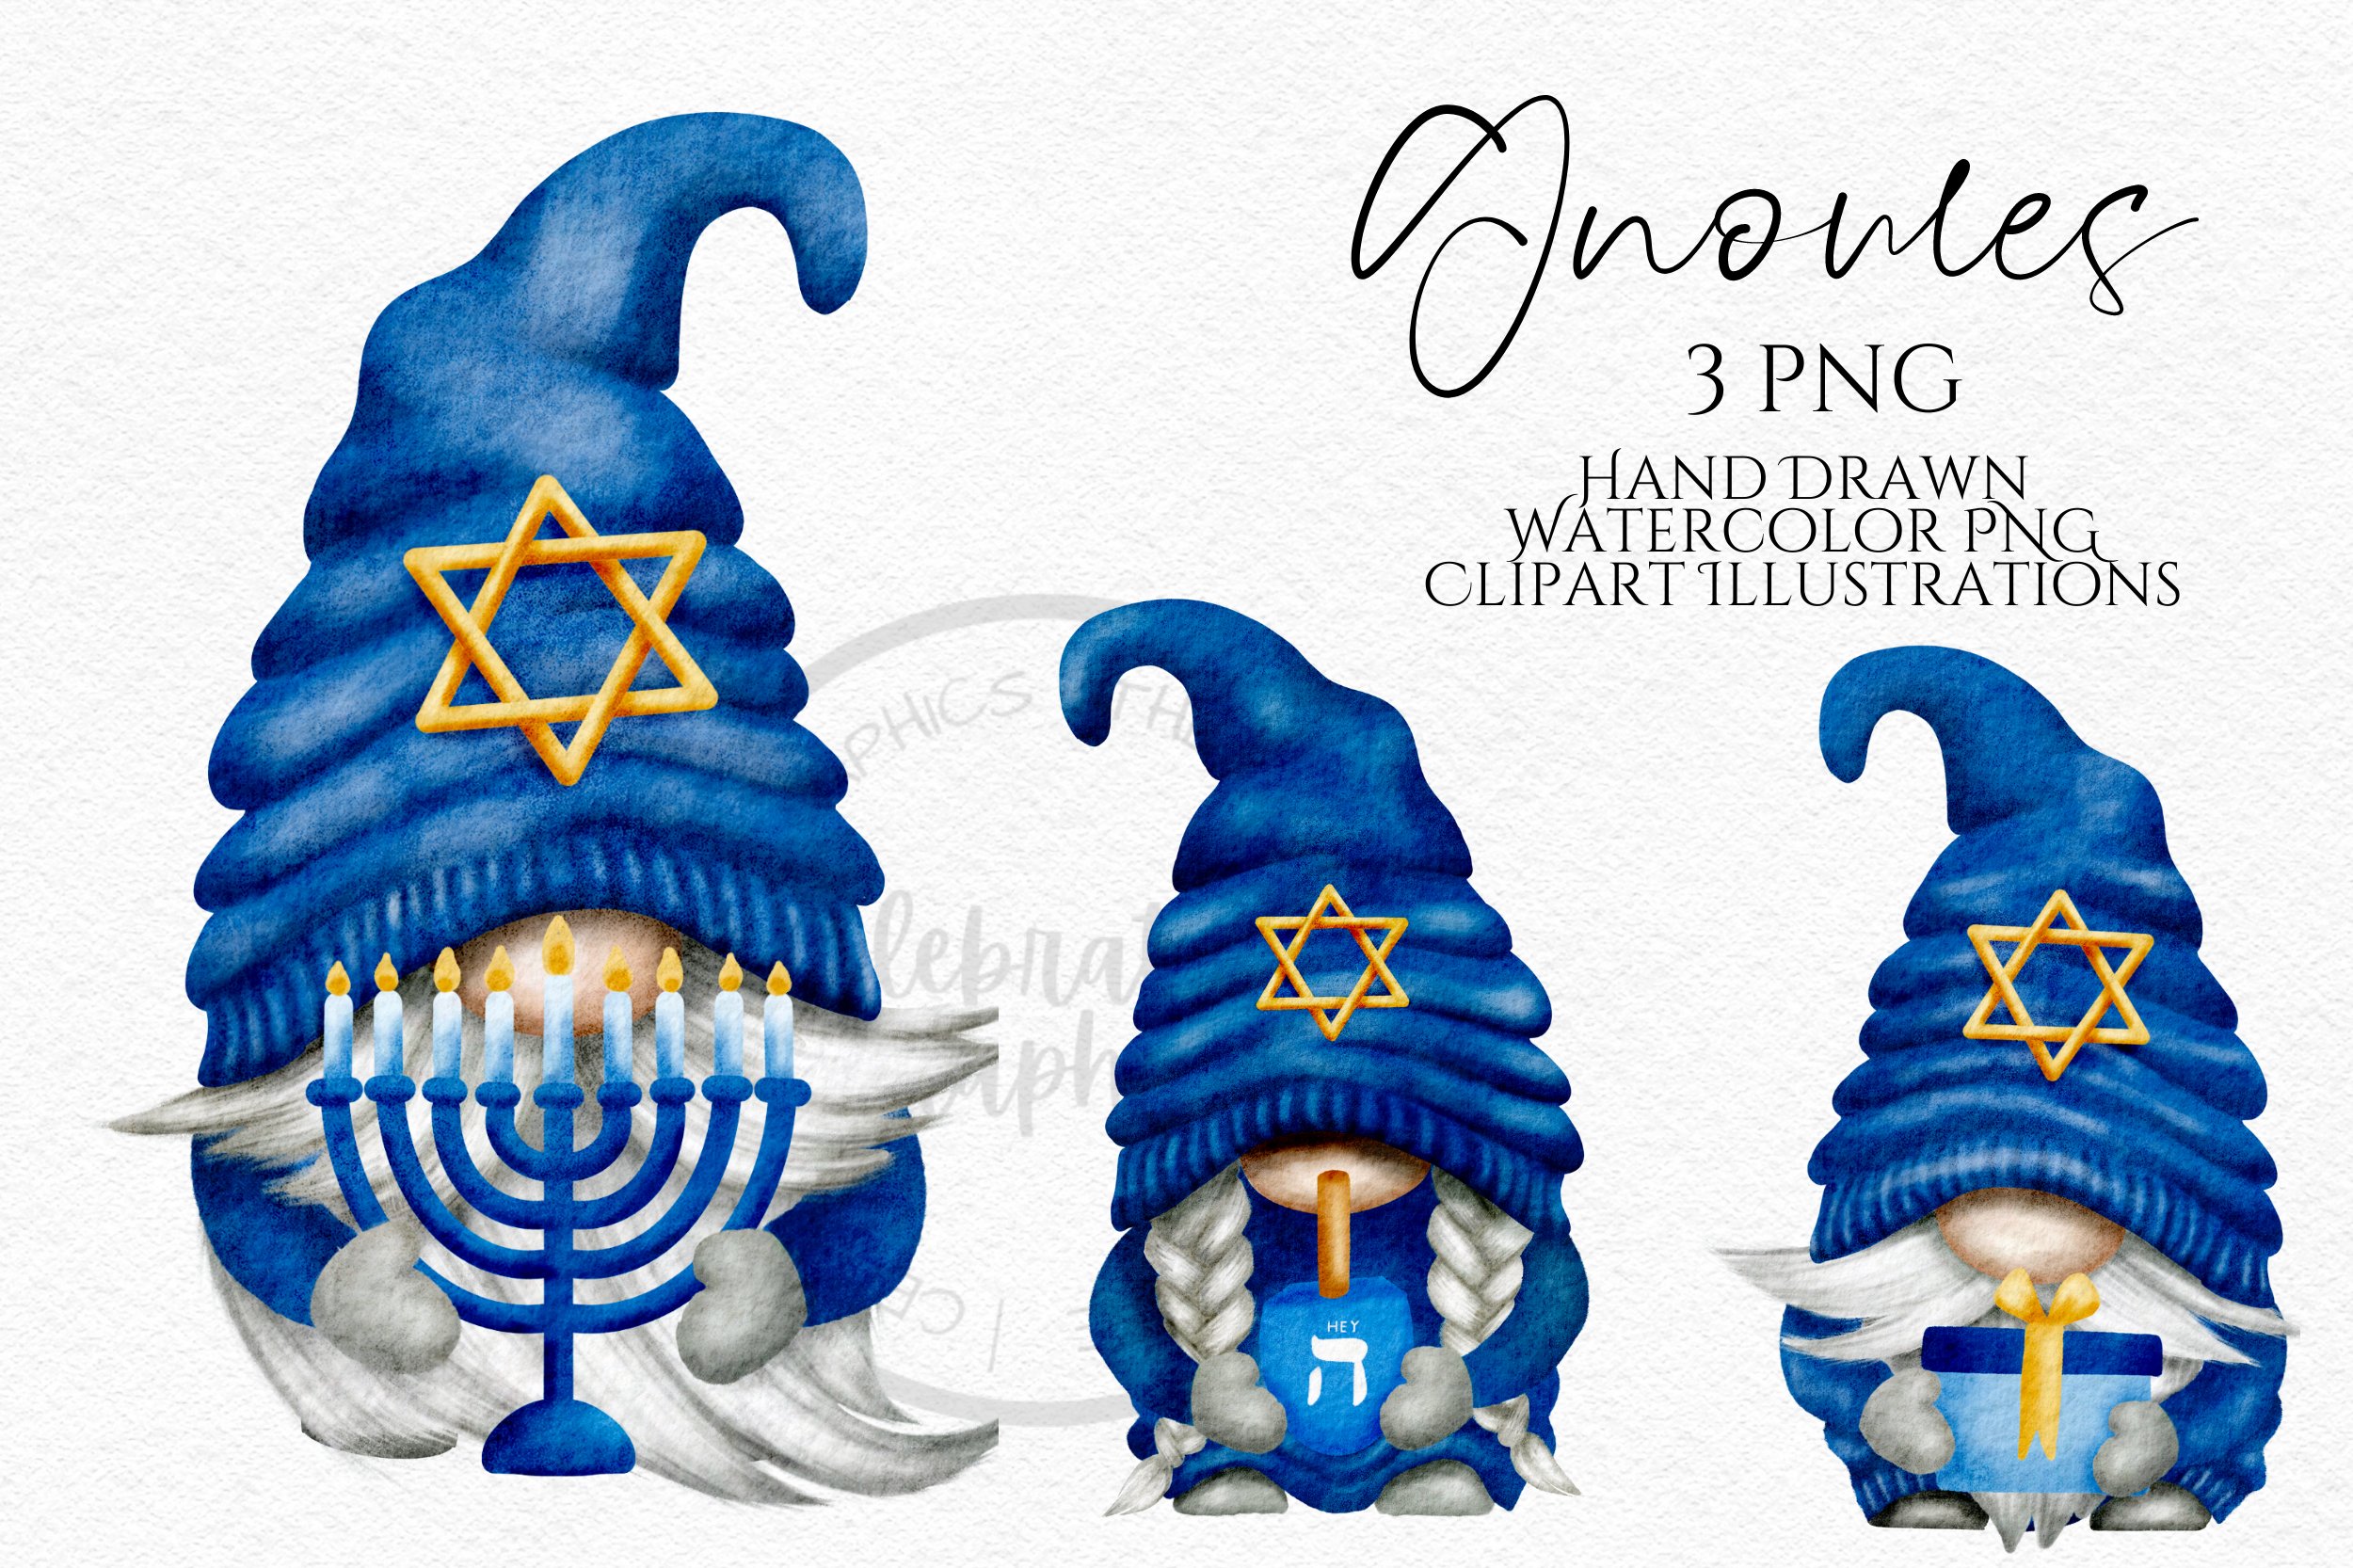 Print with three dwarfs in blue hats with a star.